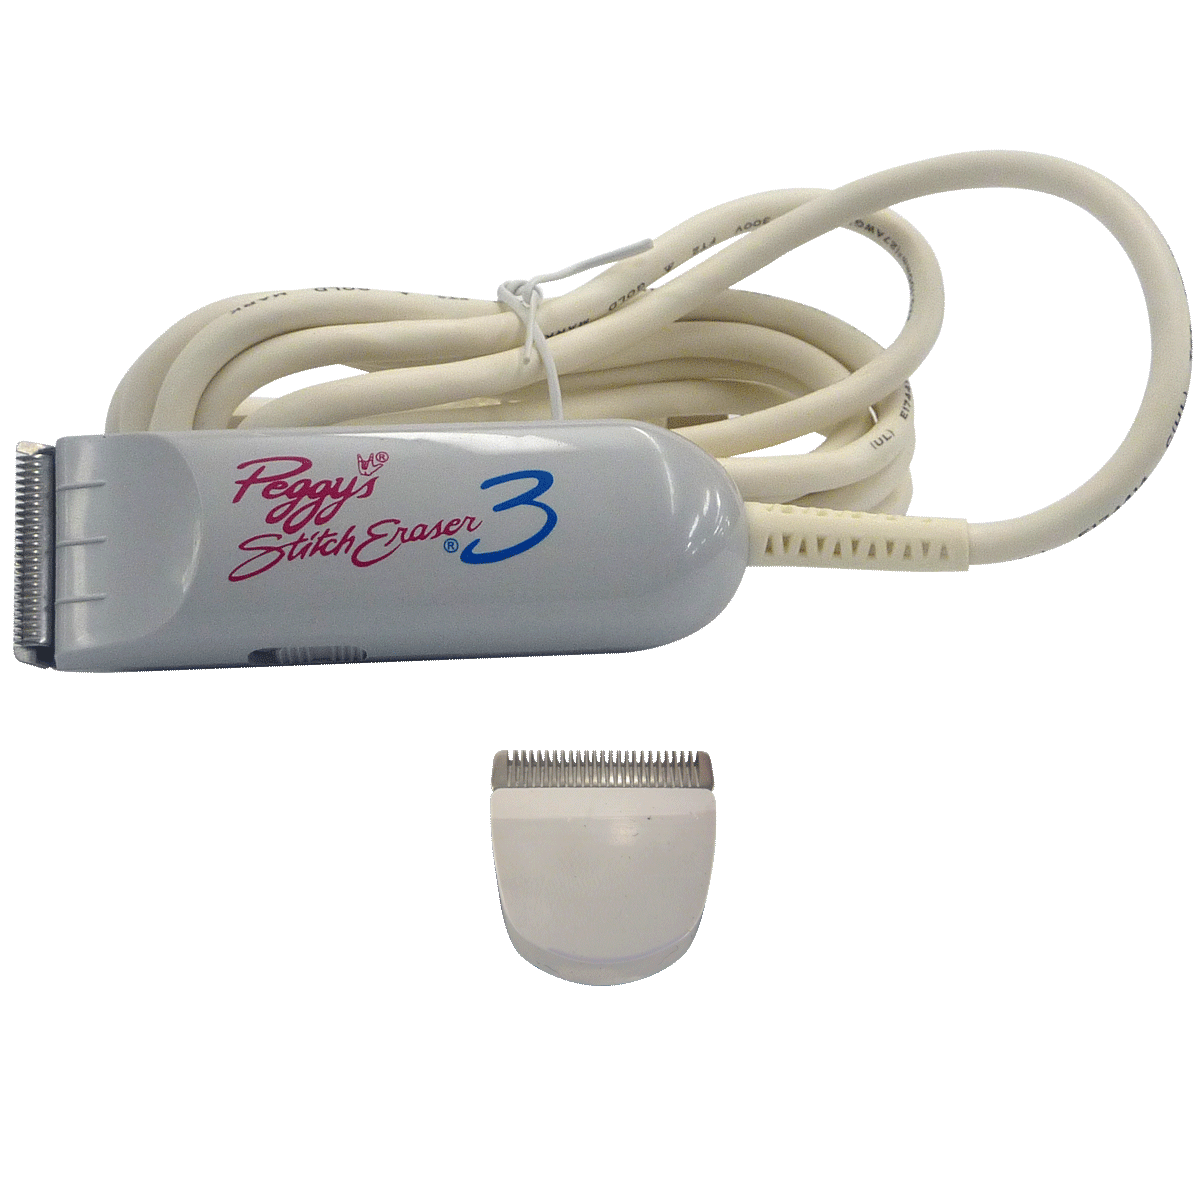 Peggy's Stitch Eraser or Replacement Blades